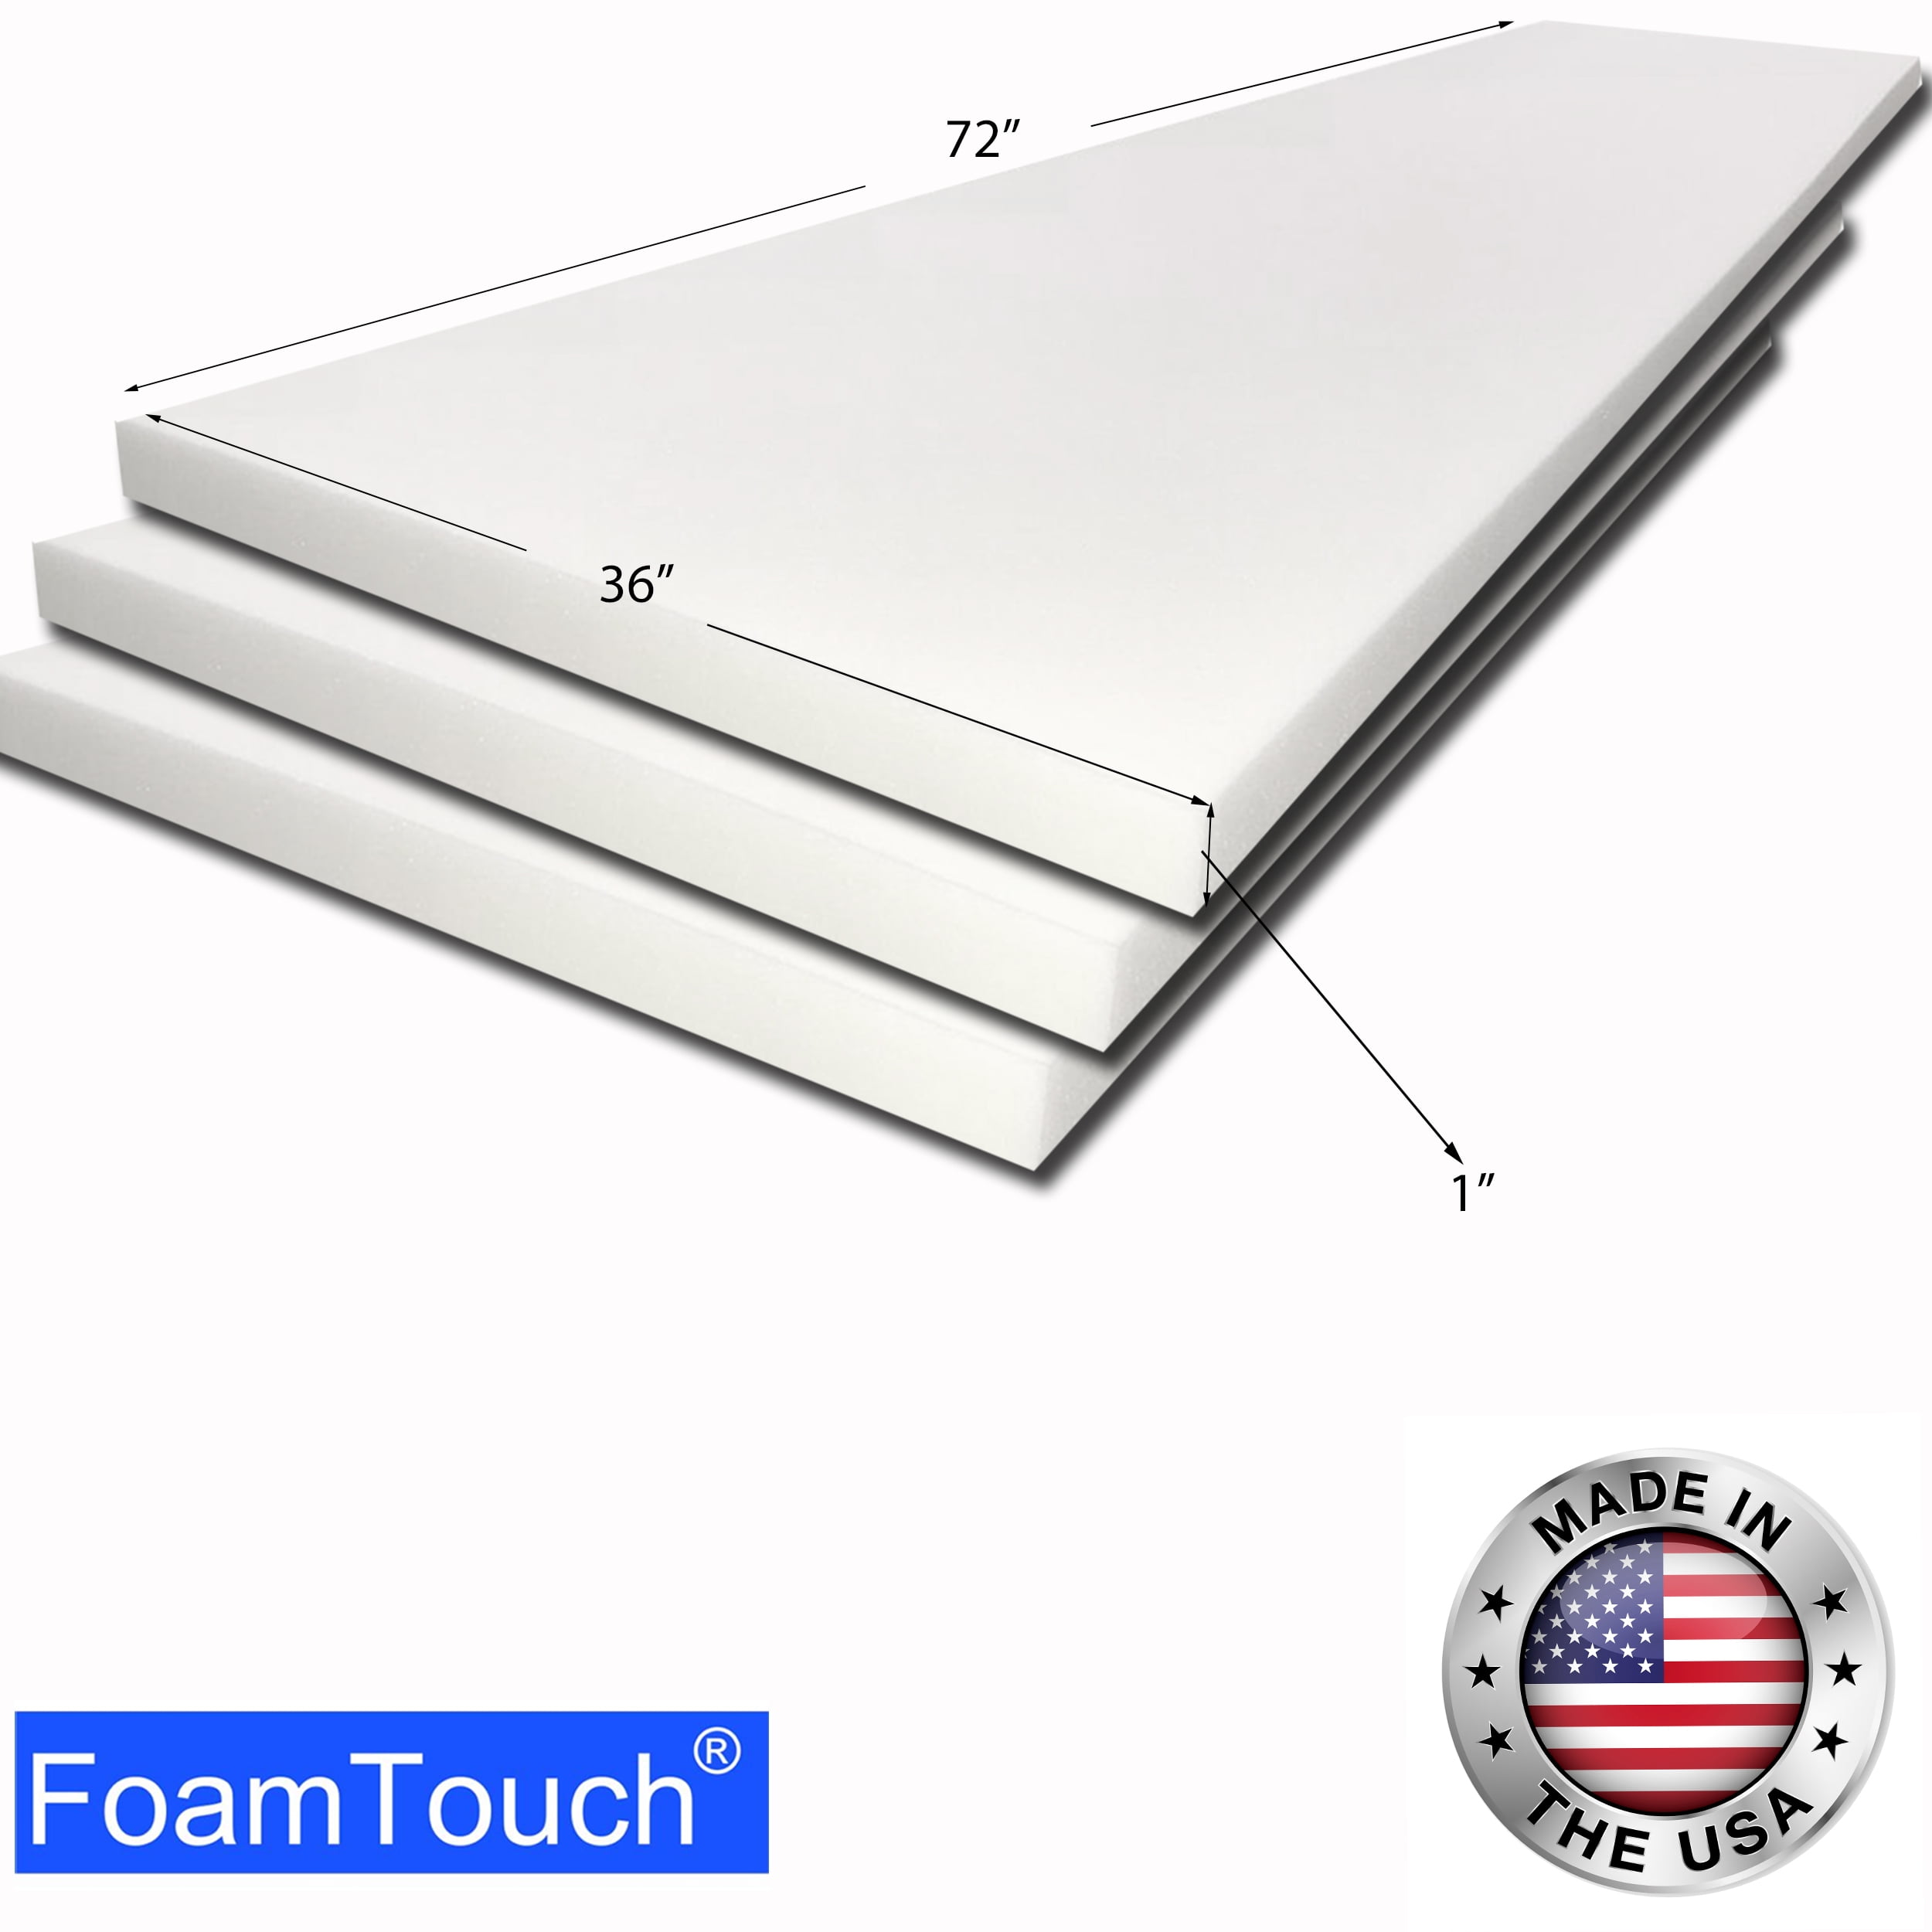 FoamTouch 6 X 36 X 72 Upholstery Foam Cushion High Density Standard  (Seat Replacement, Upholstery Sheet, Foam Padding, Bed Padding)